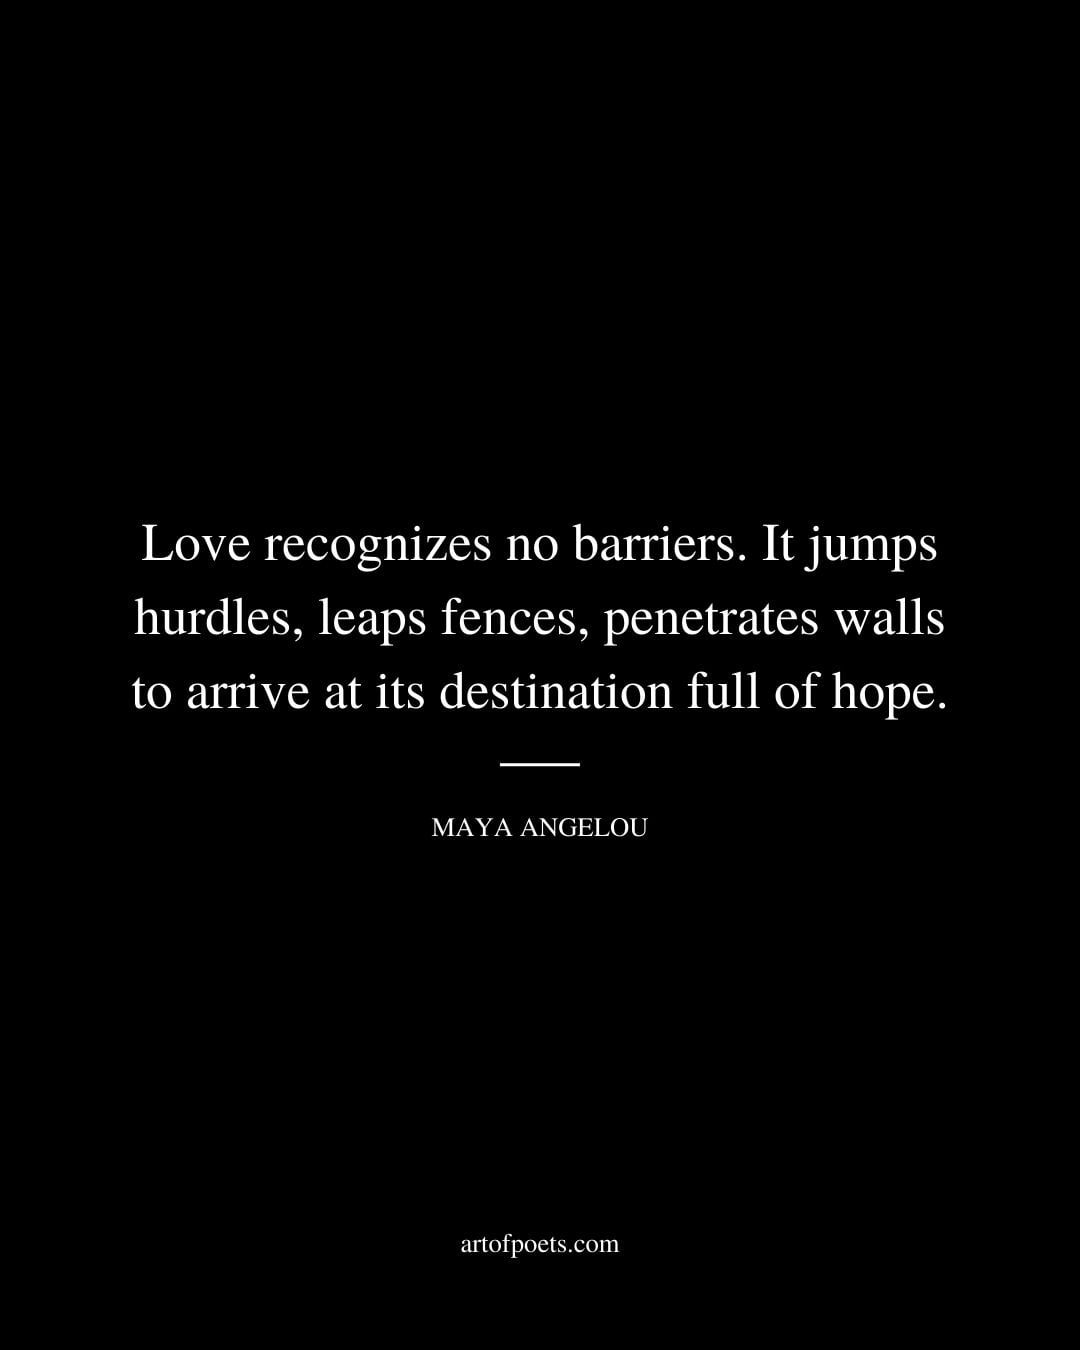 Love recognizes no barriers. It jumps hurdles leaps fences penetrates walls to arrive at its destination full of hope. –Maya Angelou